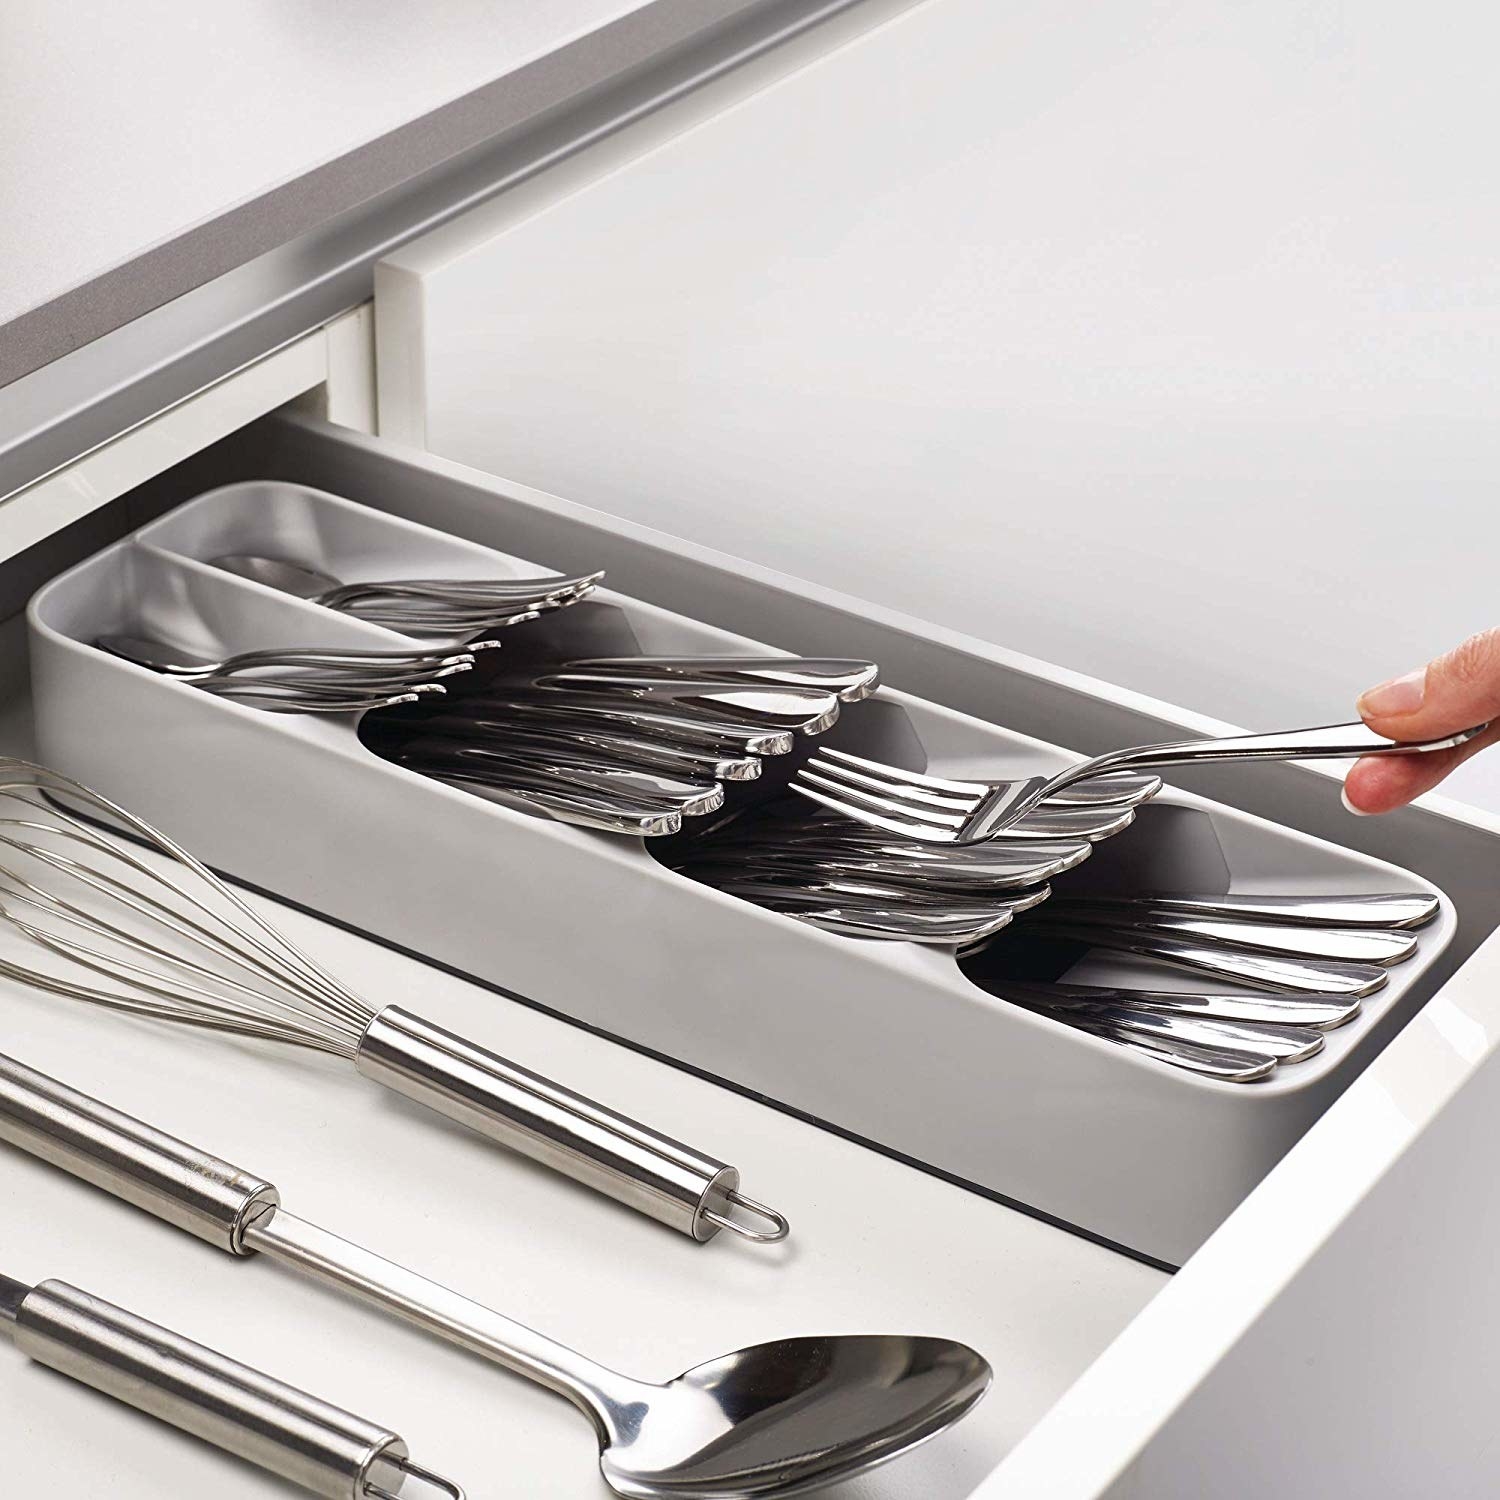 A rectangular utensil organizer that only takes up half a kitchen drawer There are four sections and each is filled with metal cutlery